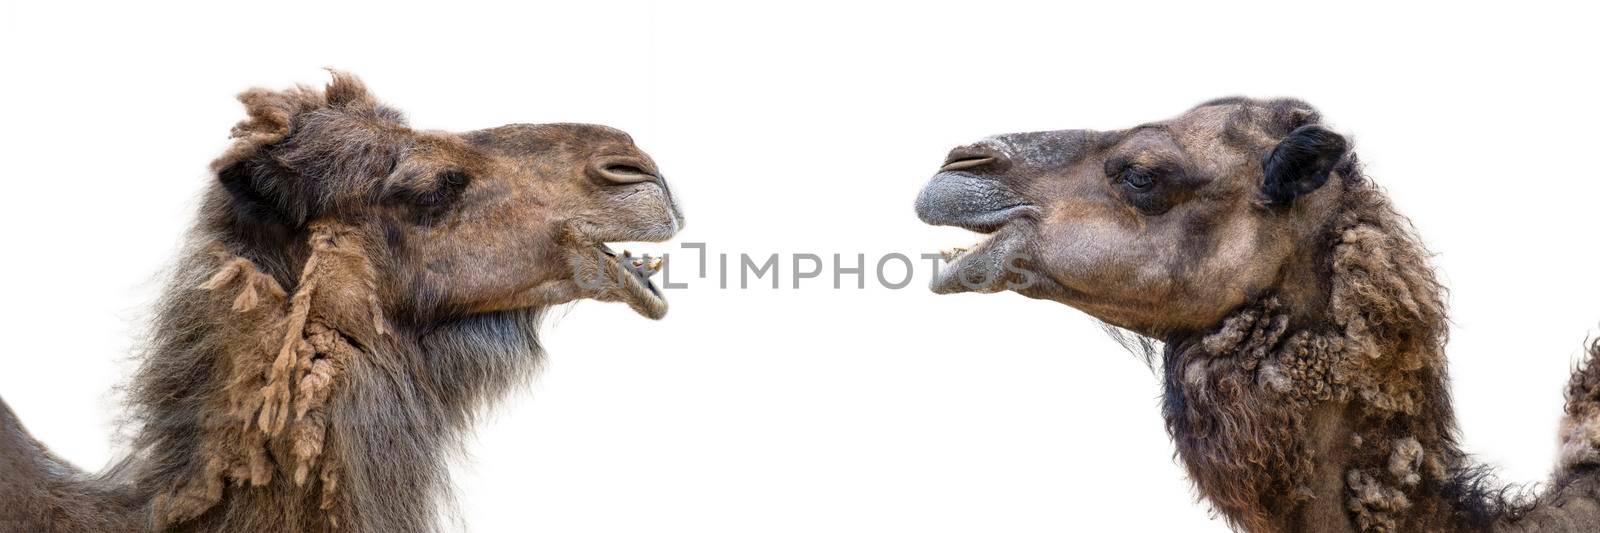 Two smiling camels on a white background. Camel head close up, side view. The camel opened its mouth and showed its teeth.